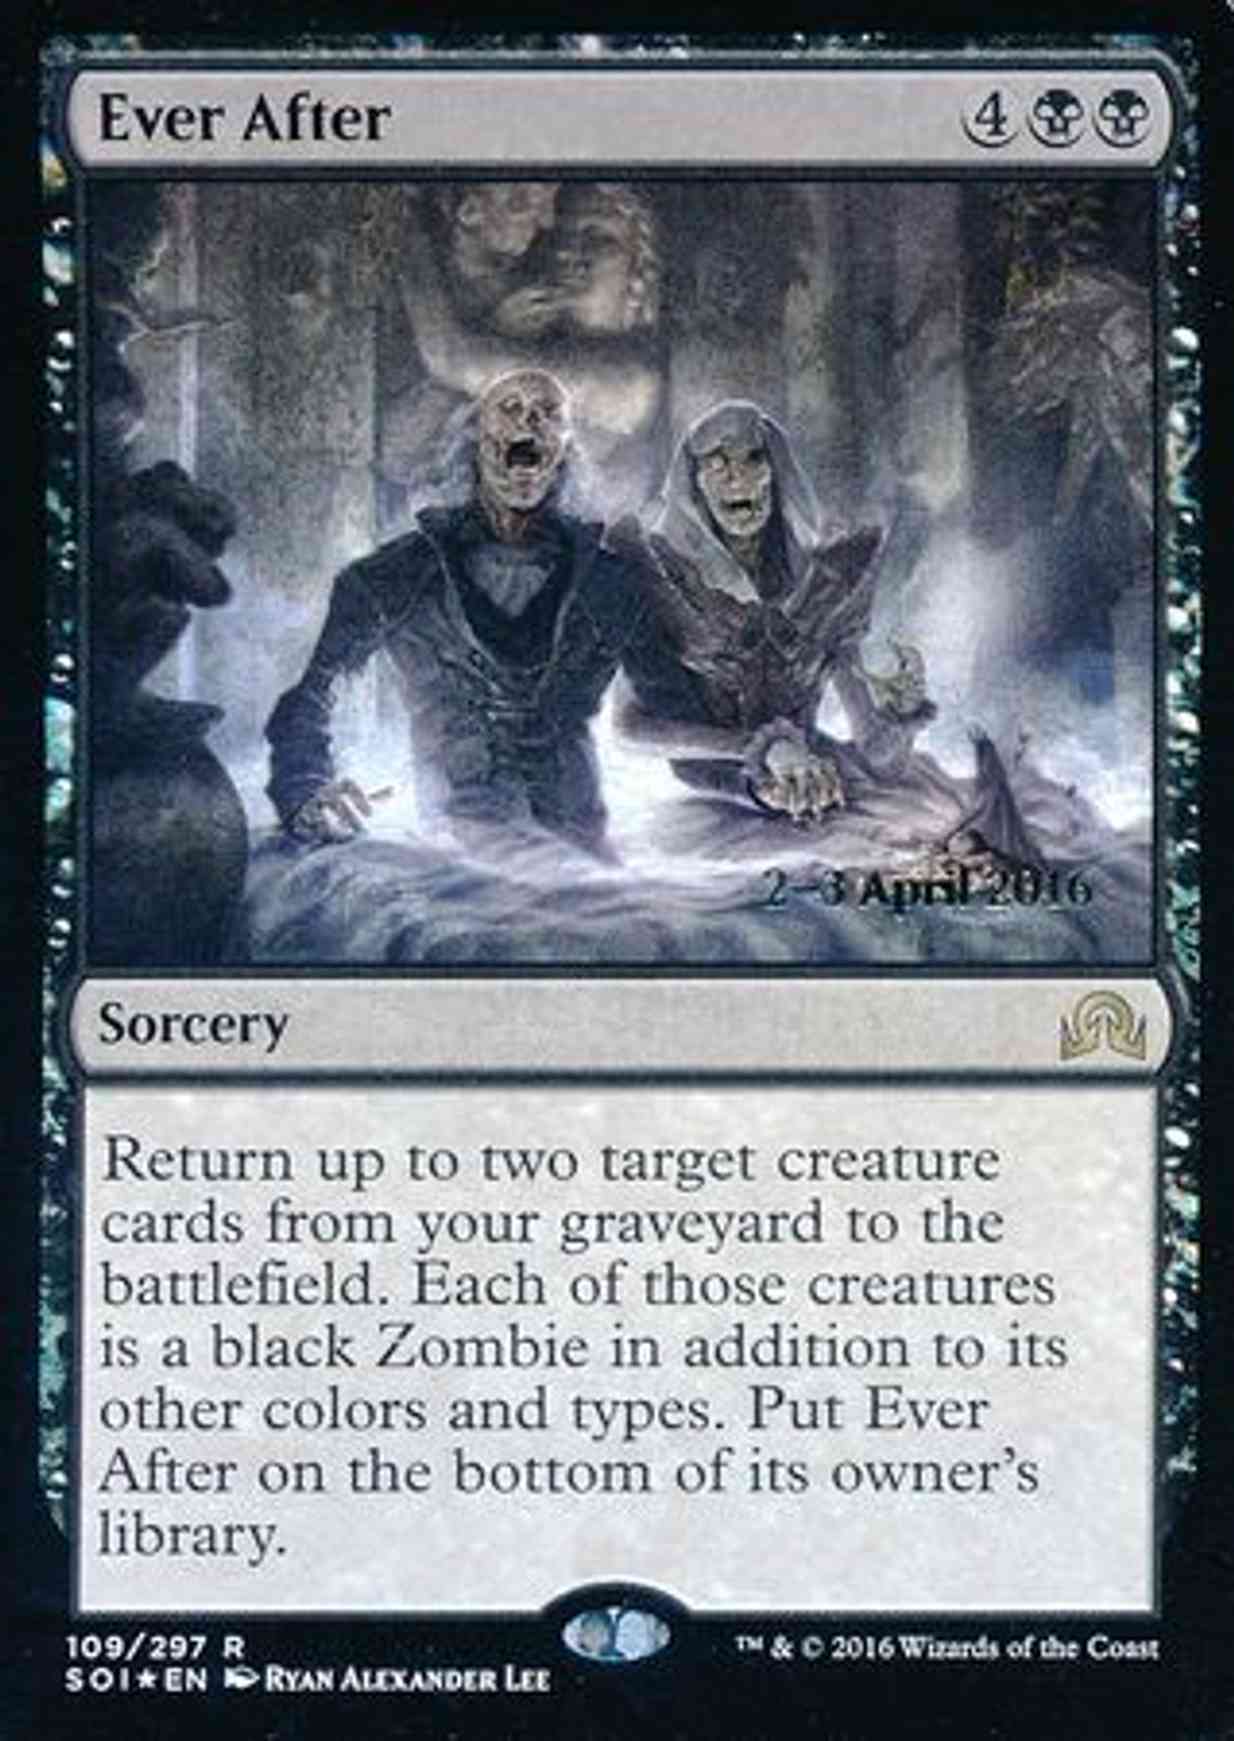 Ever After magic card front